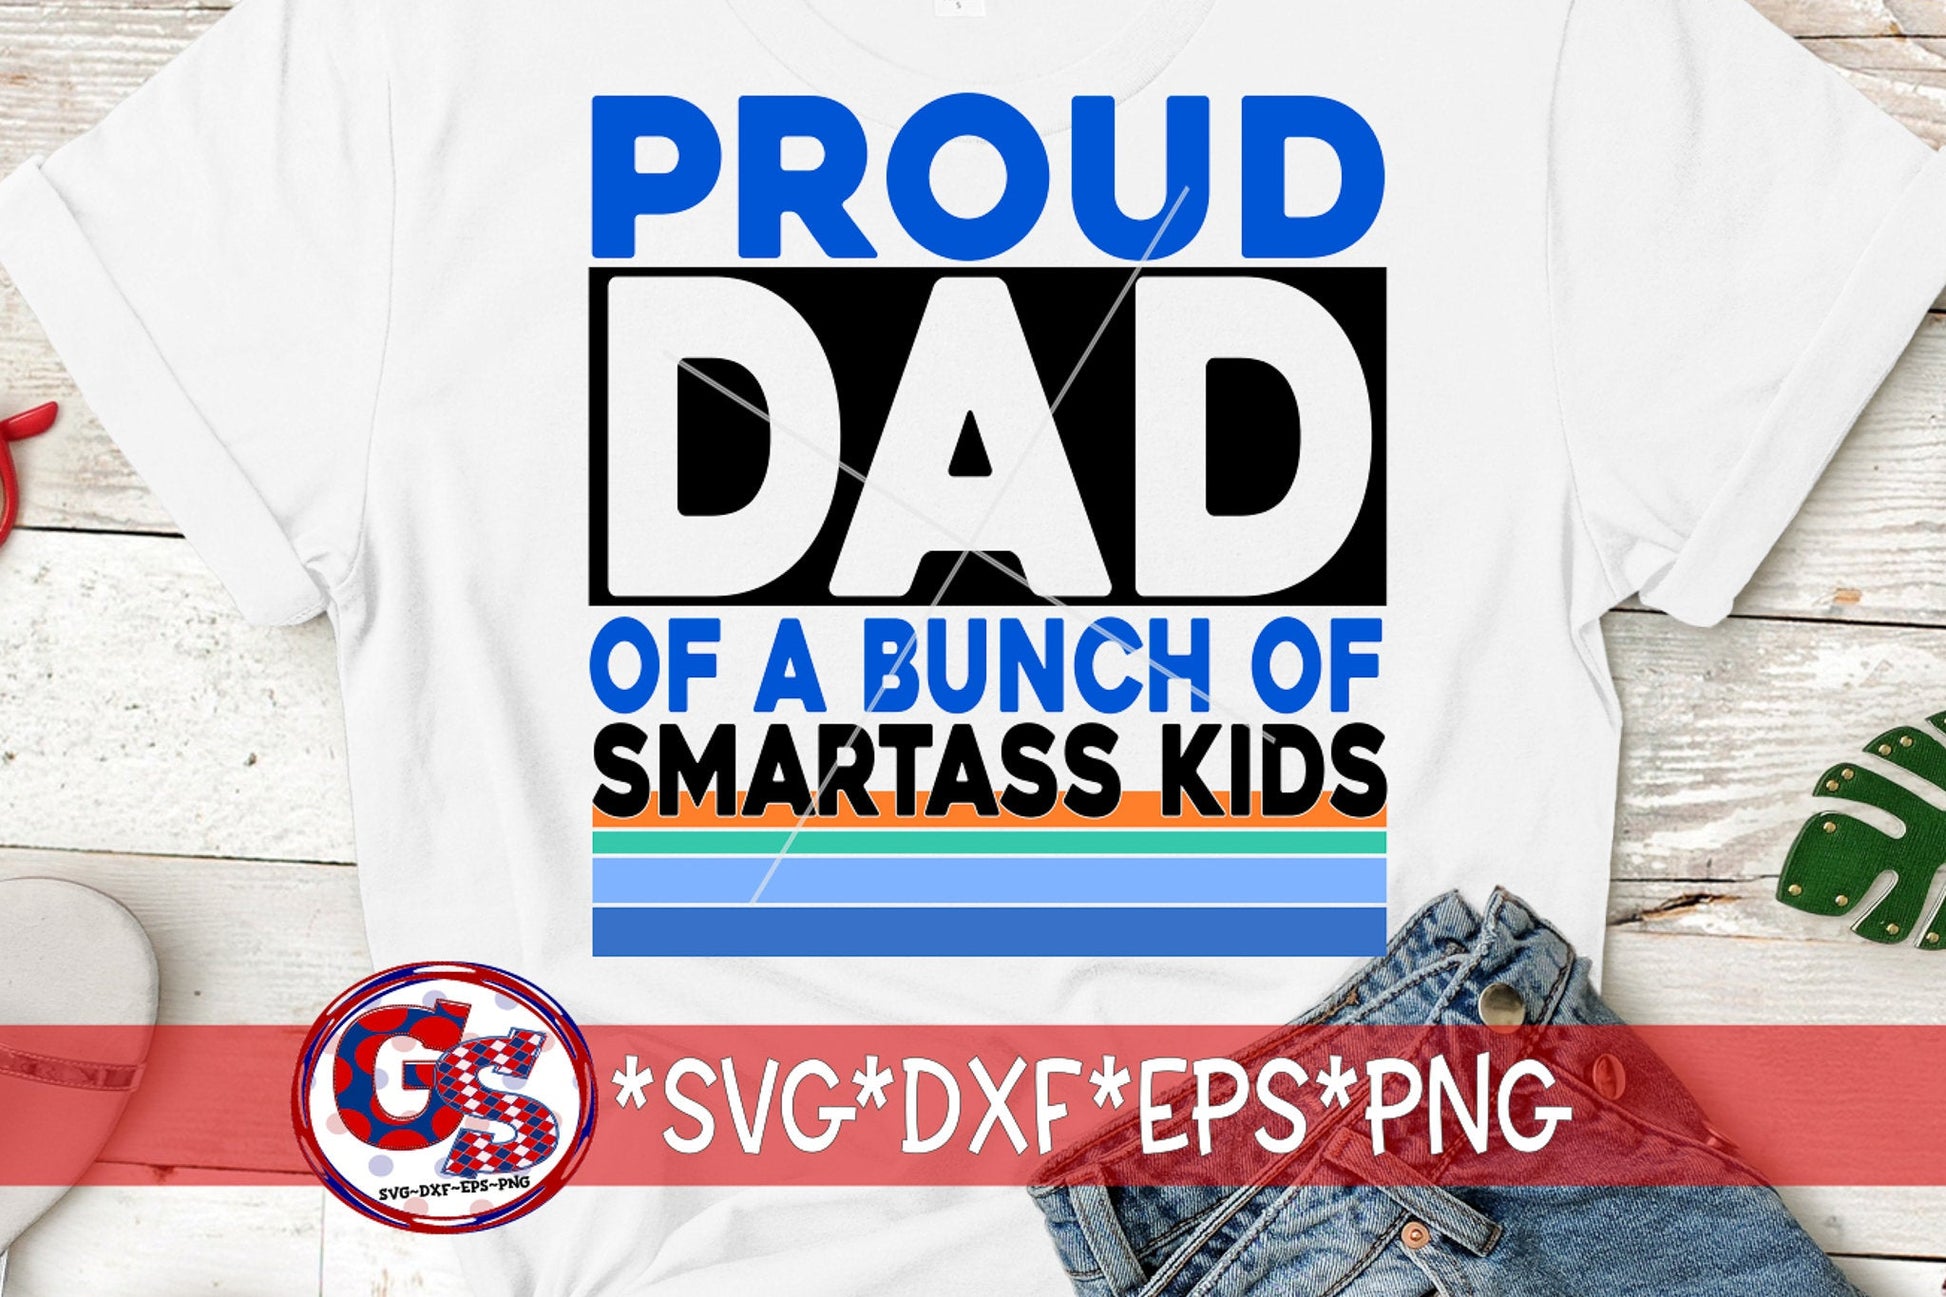 Father&#39;s Day SVG | Proud Dad Of A Bunch Of Smartass Kids svg dxf eps png eps. Dad SVG | Proud Dad SvG | Smartass Kids SvG | Instant Download